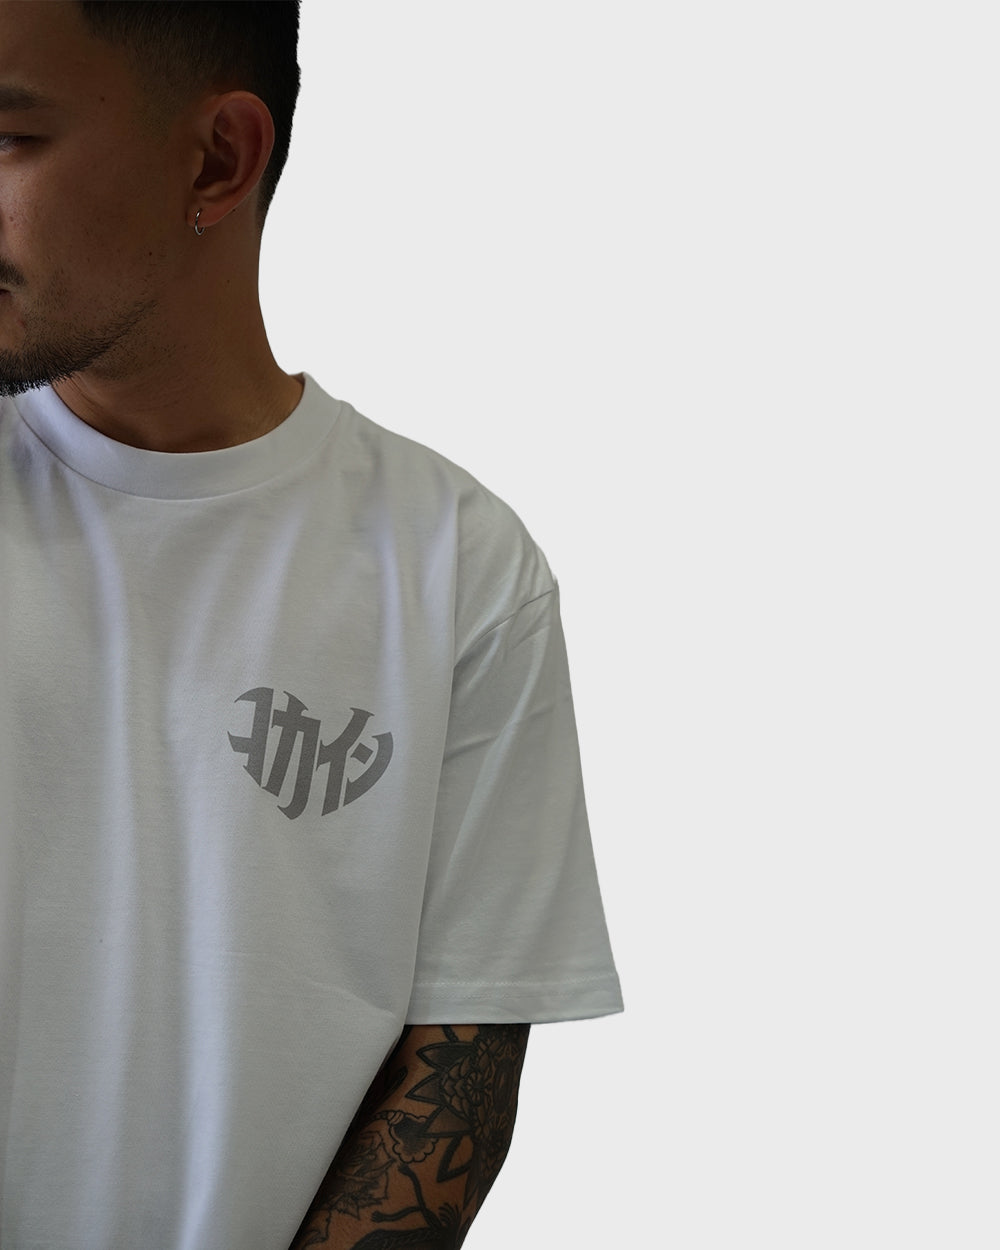 R32 @32onhgh "Love Yours" T Shirt // White